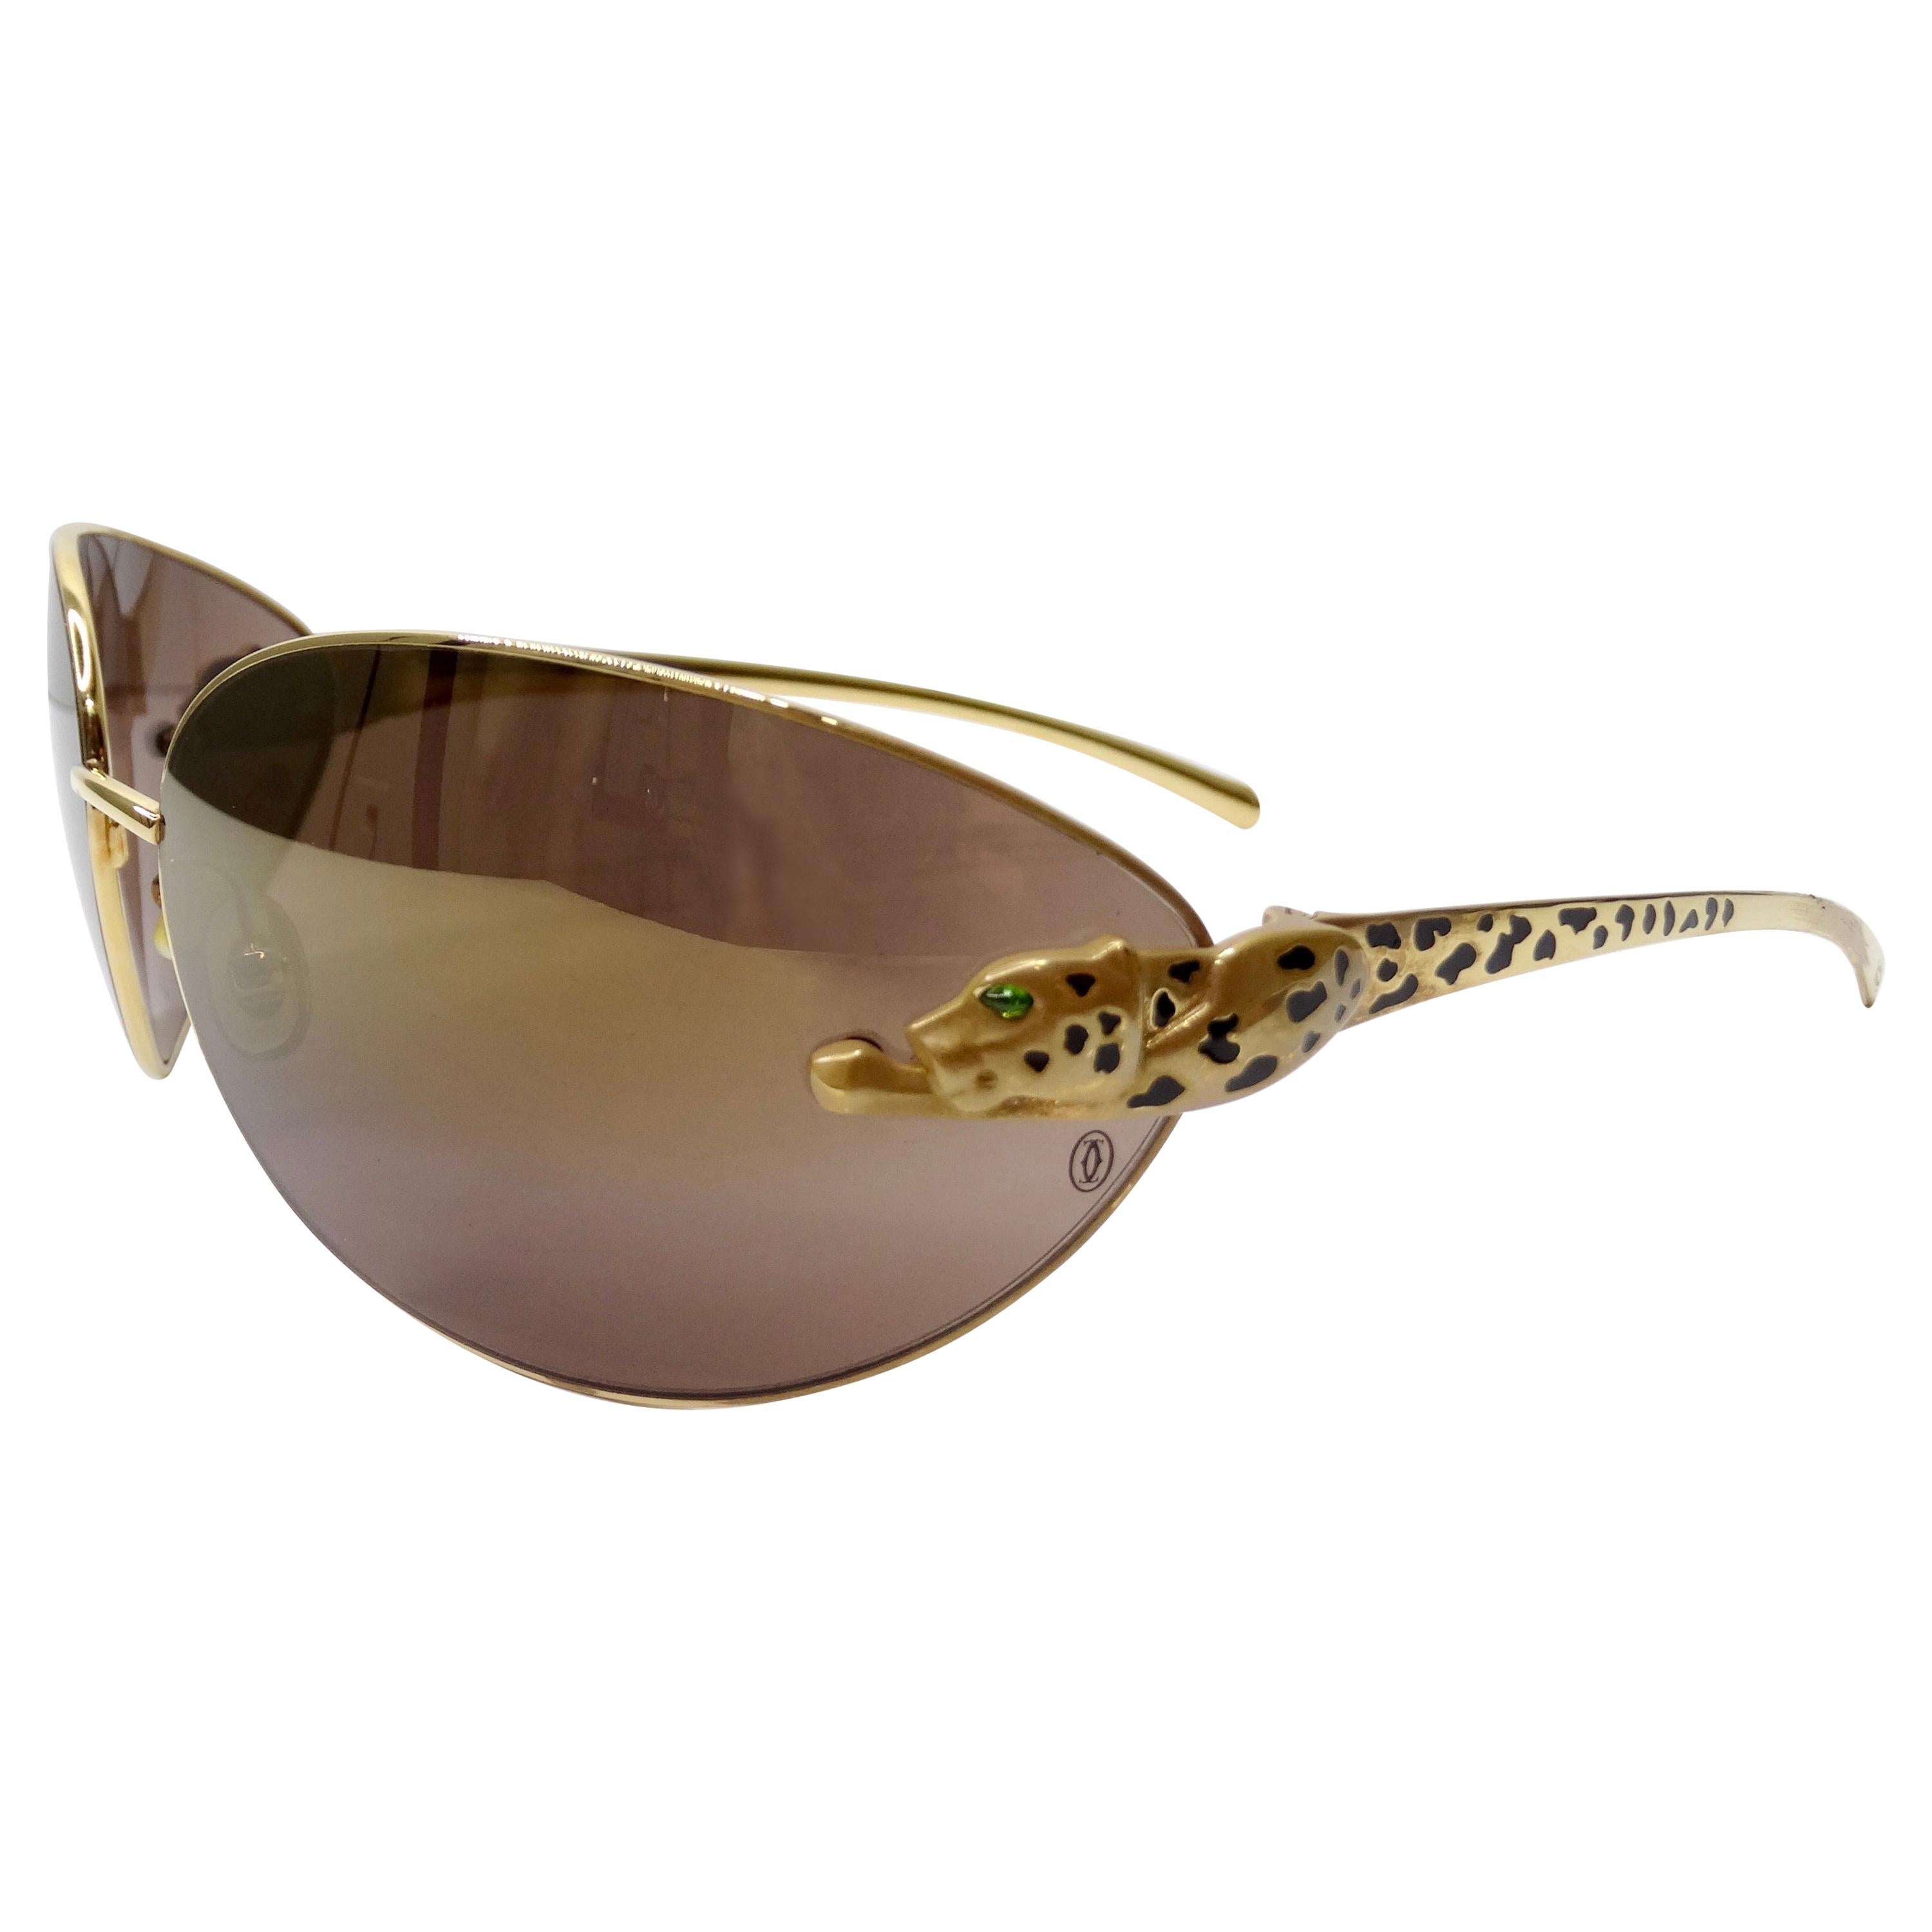 Cartier Panthere Limited Series Sunglasses 